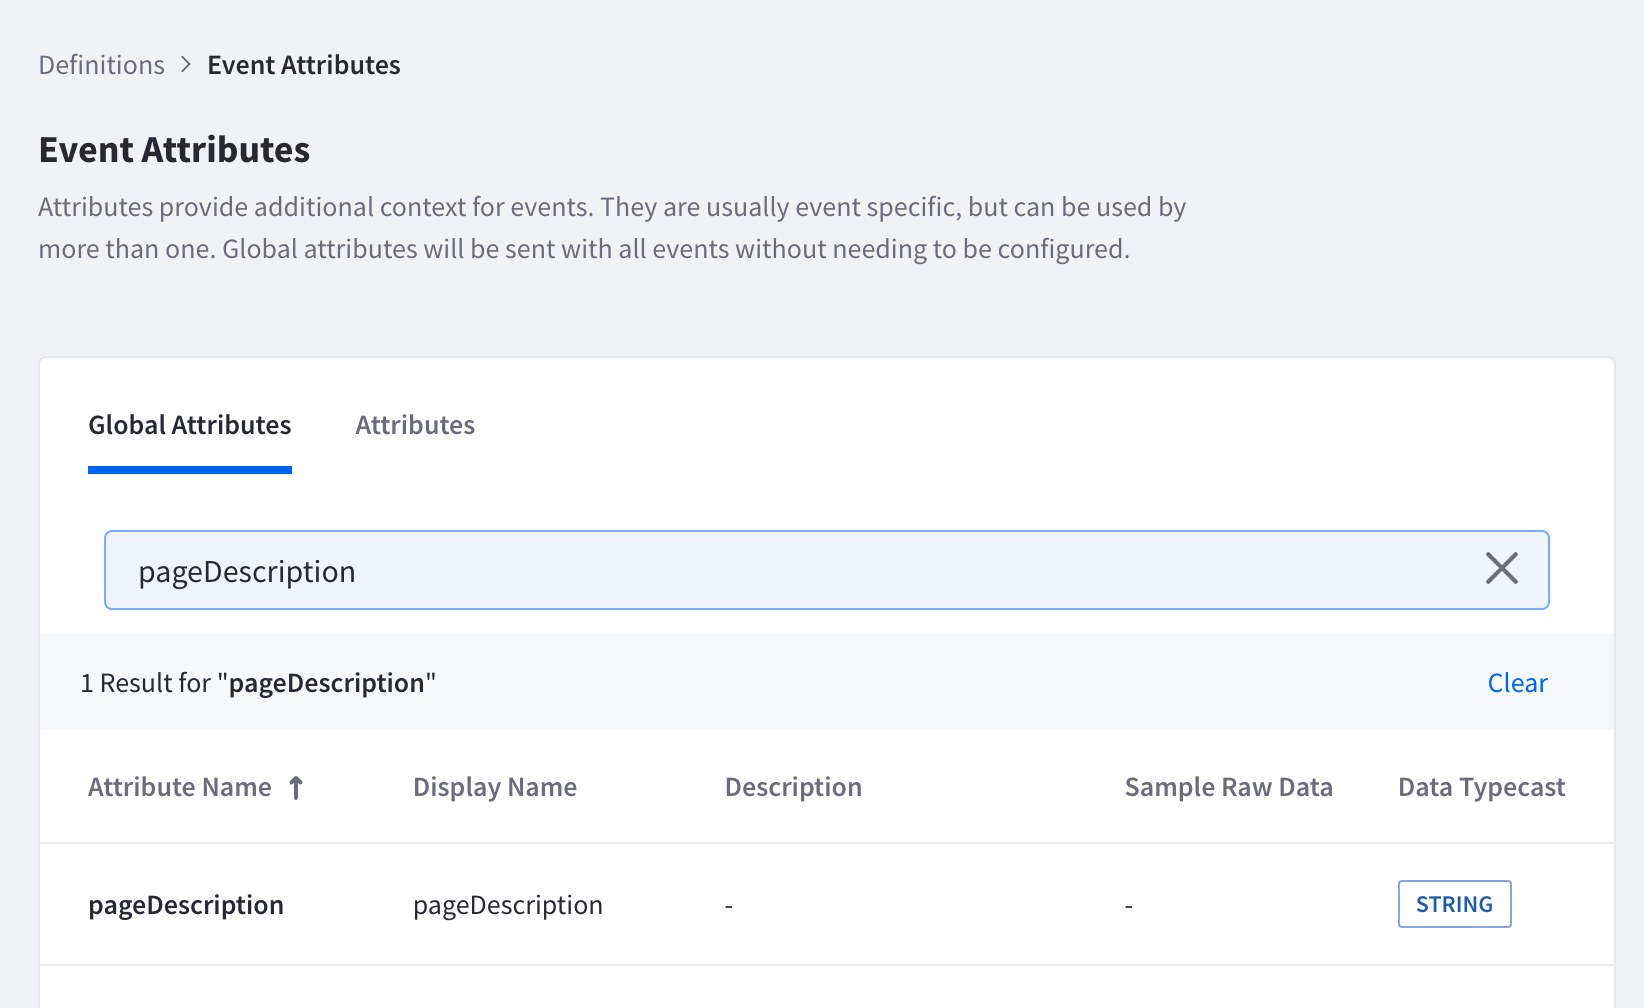 Select or search for a specific event attribute.